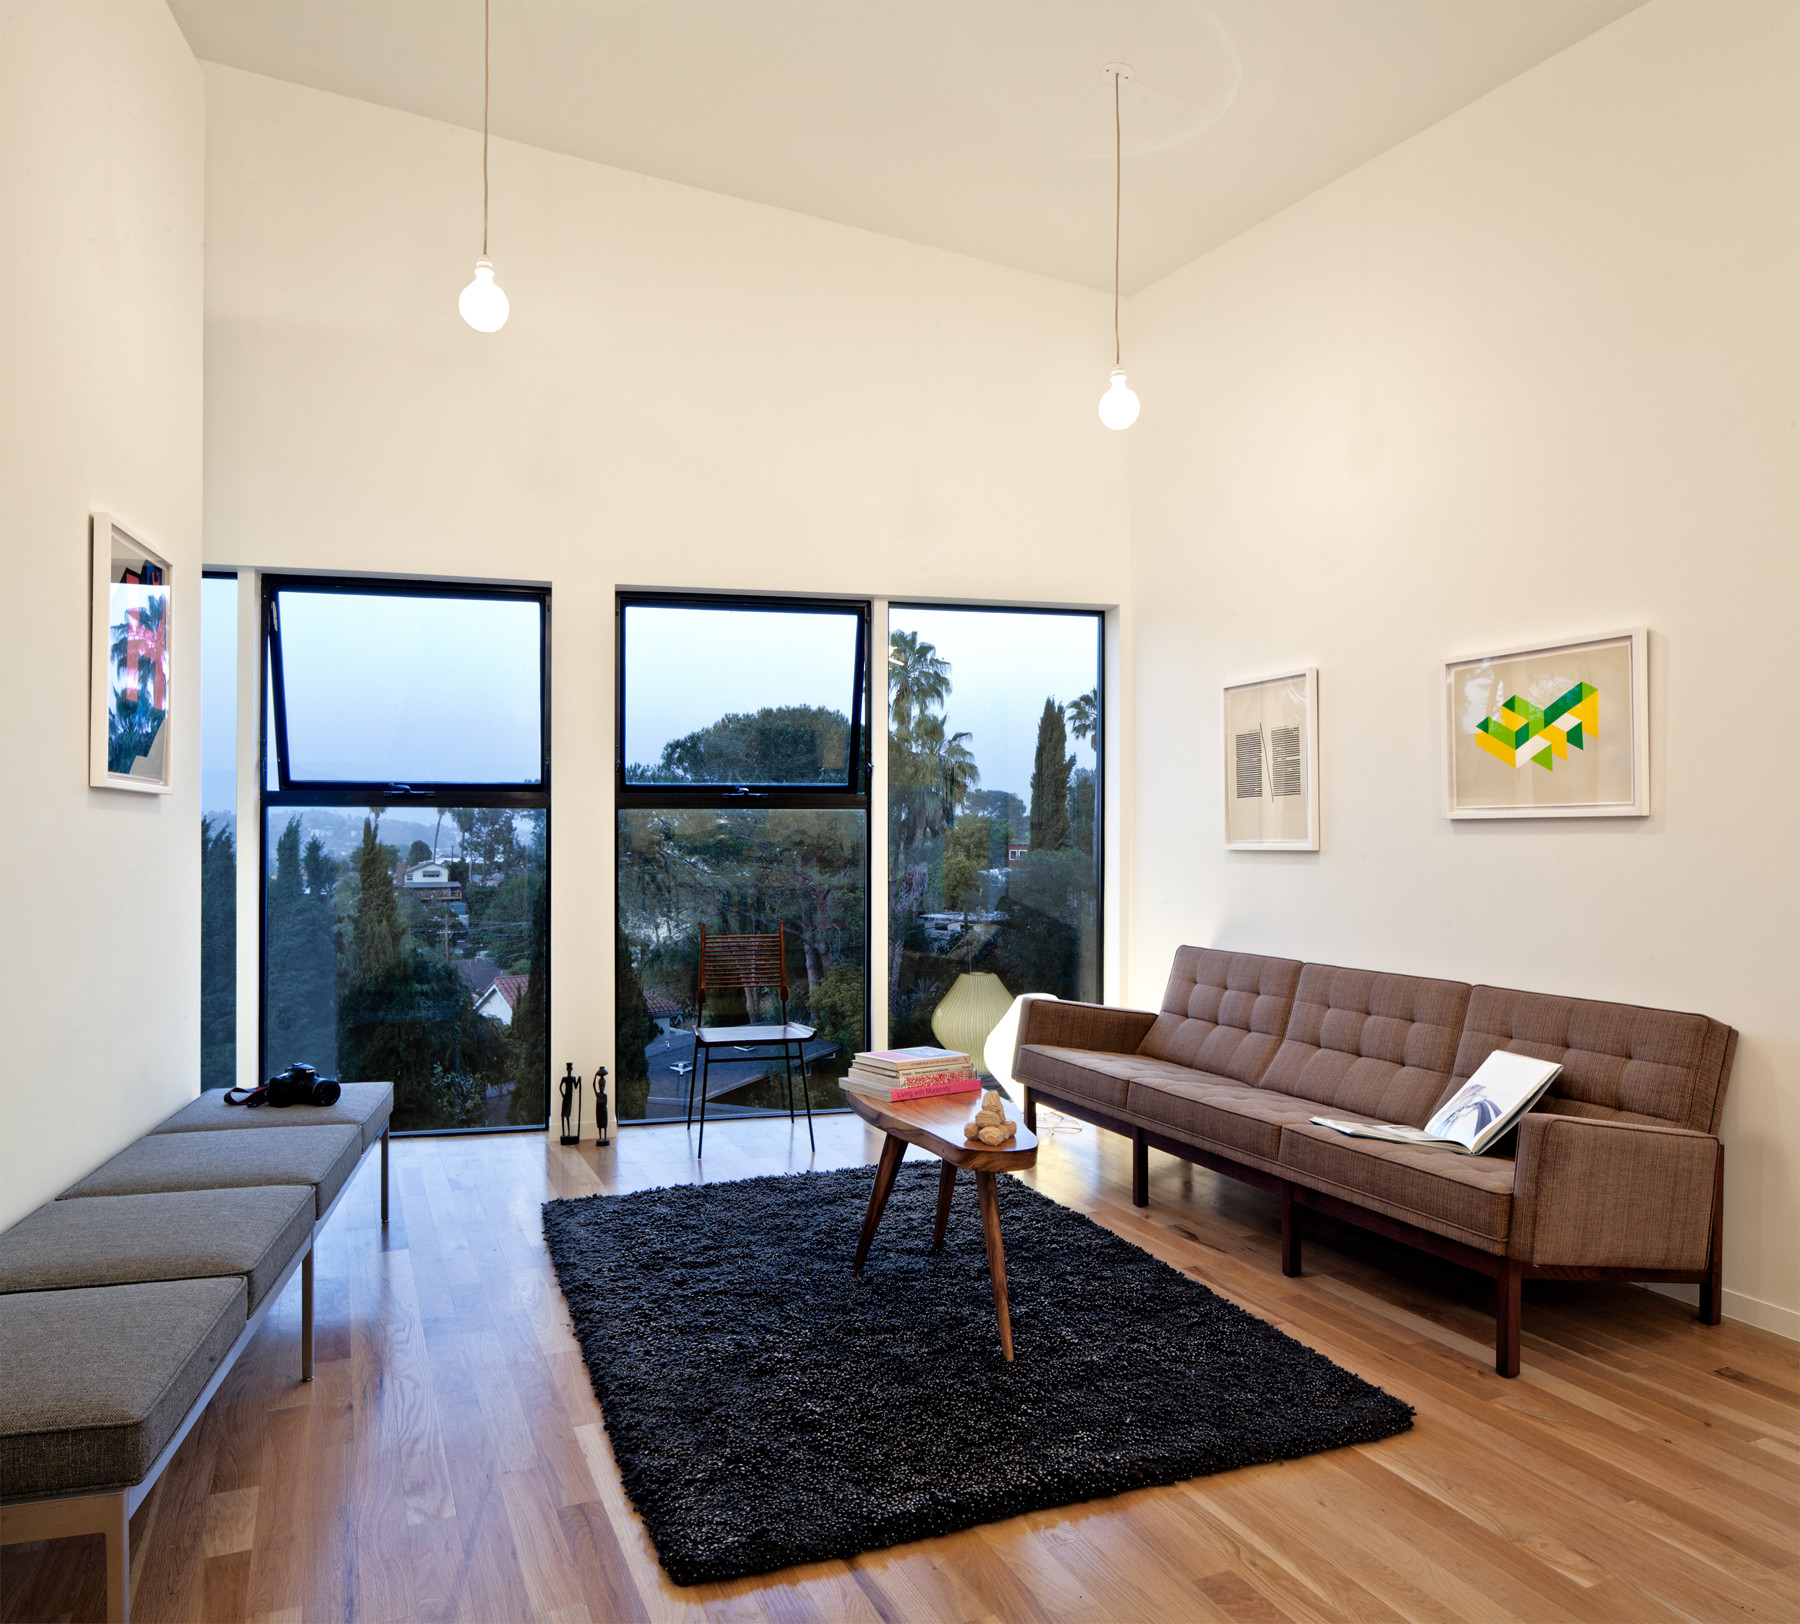 A Single Space Living Area Helps This Compact Home To Feel Spacious